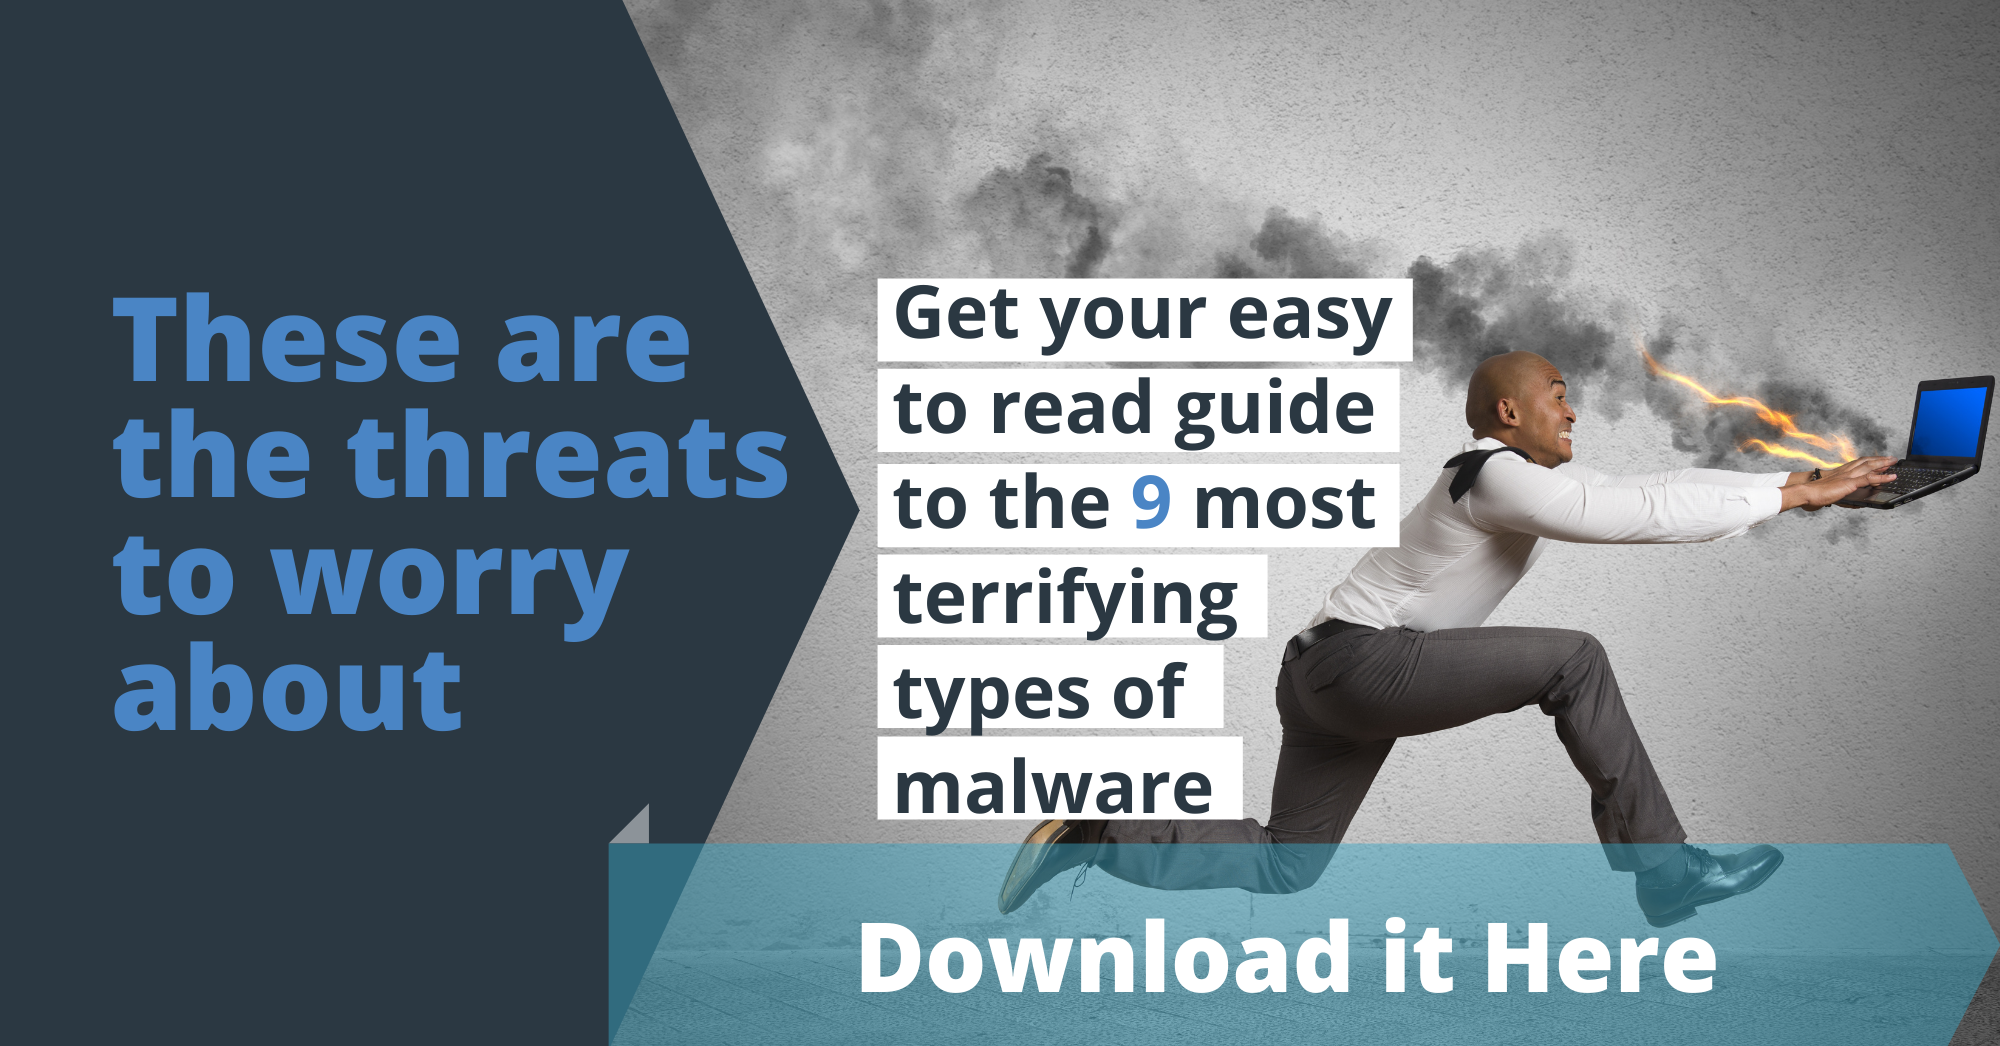 These are the threats to worry about...An easy to read guide to the 9 most terrifying types of malware